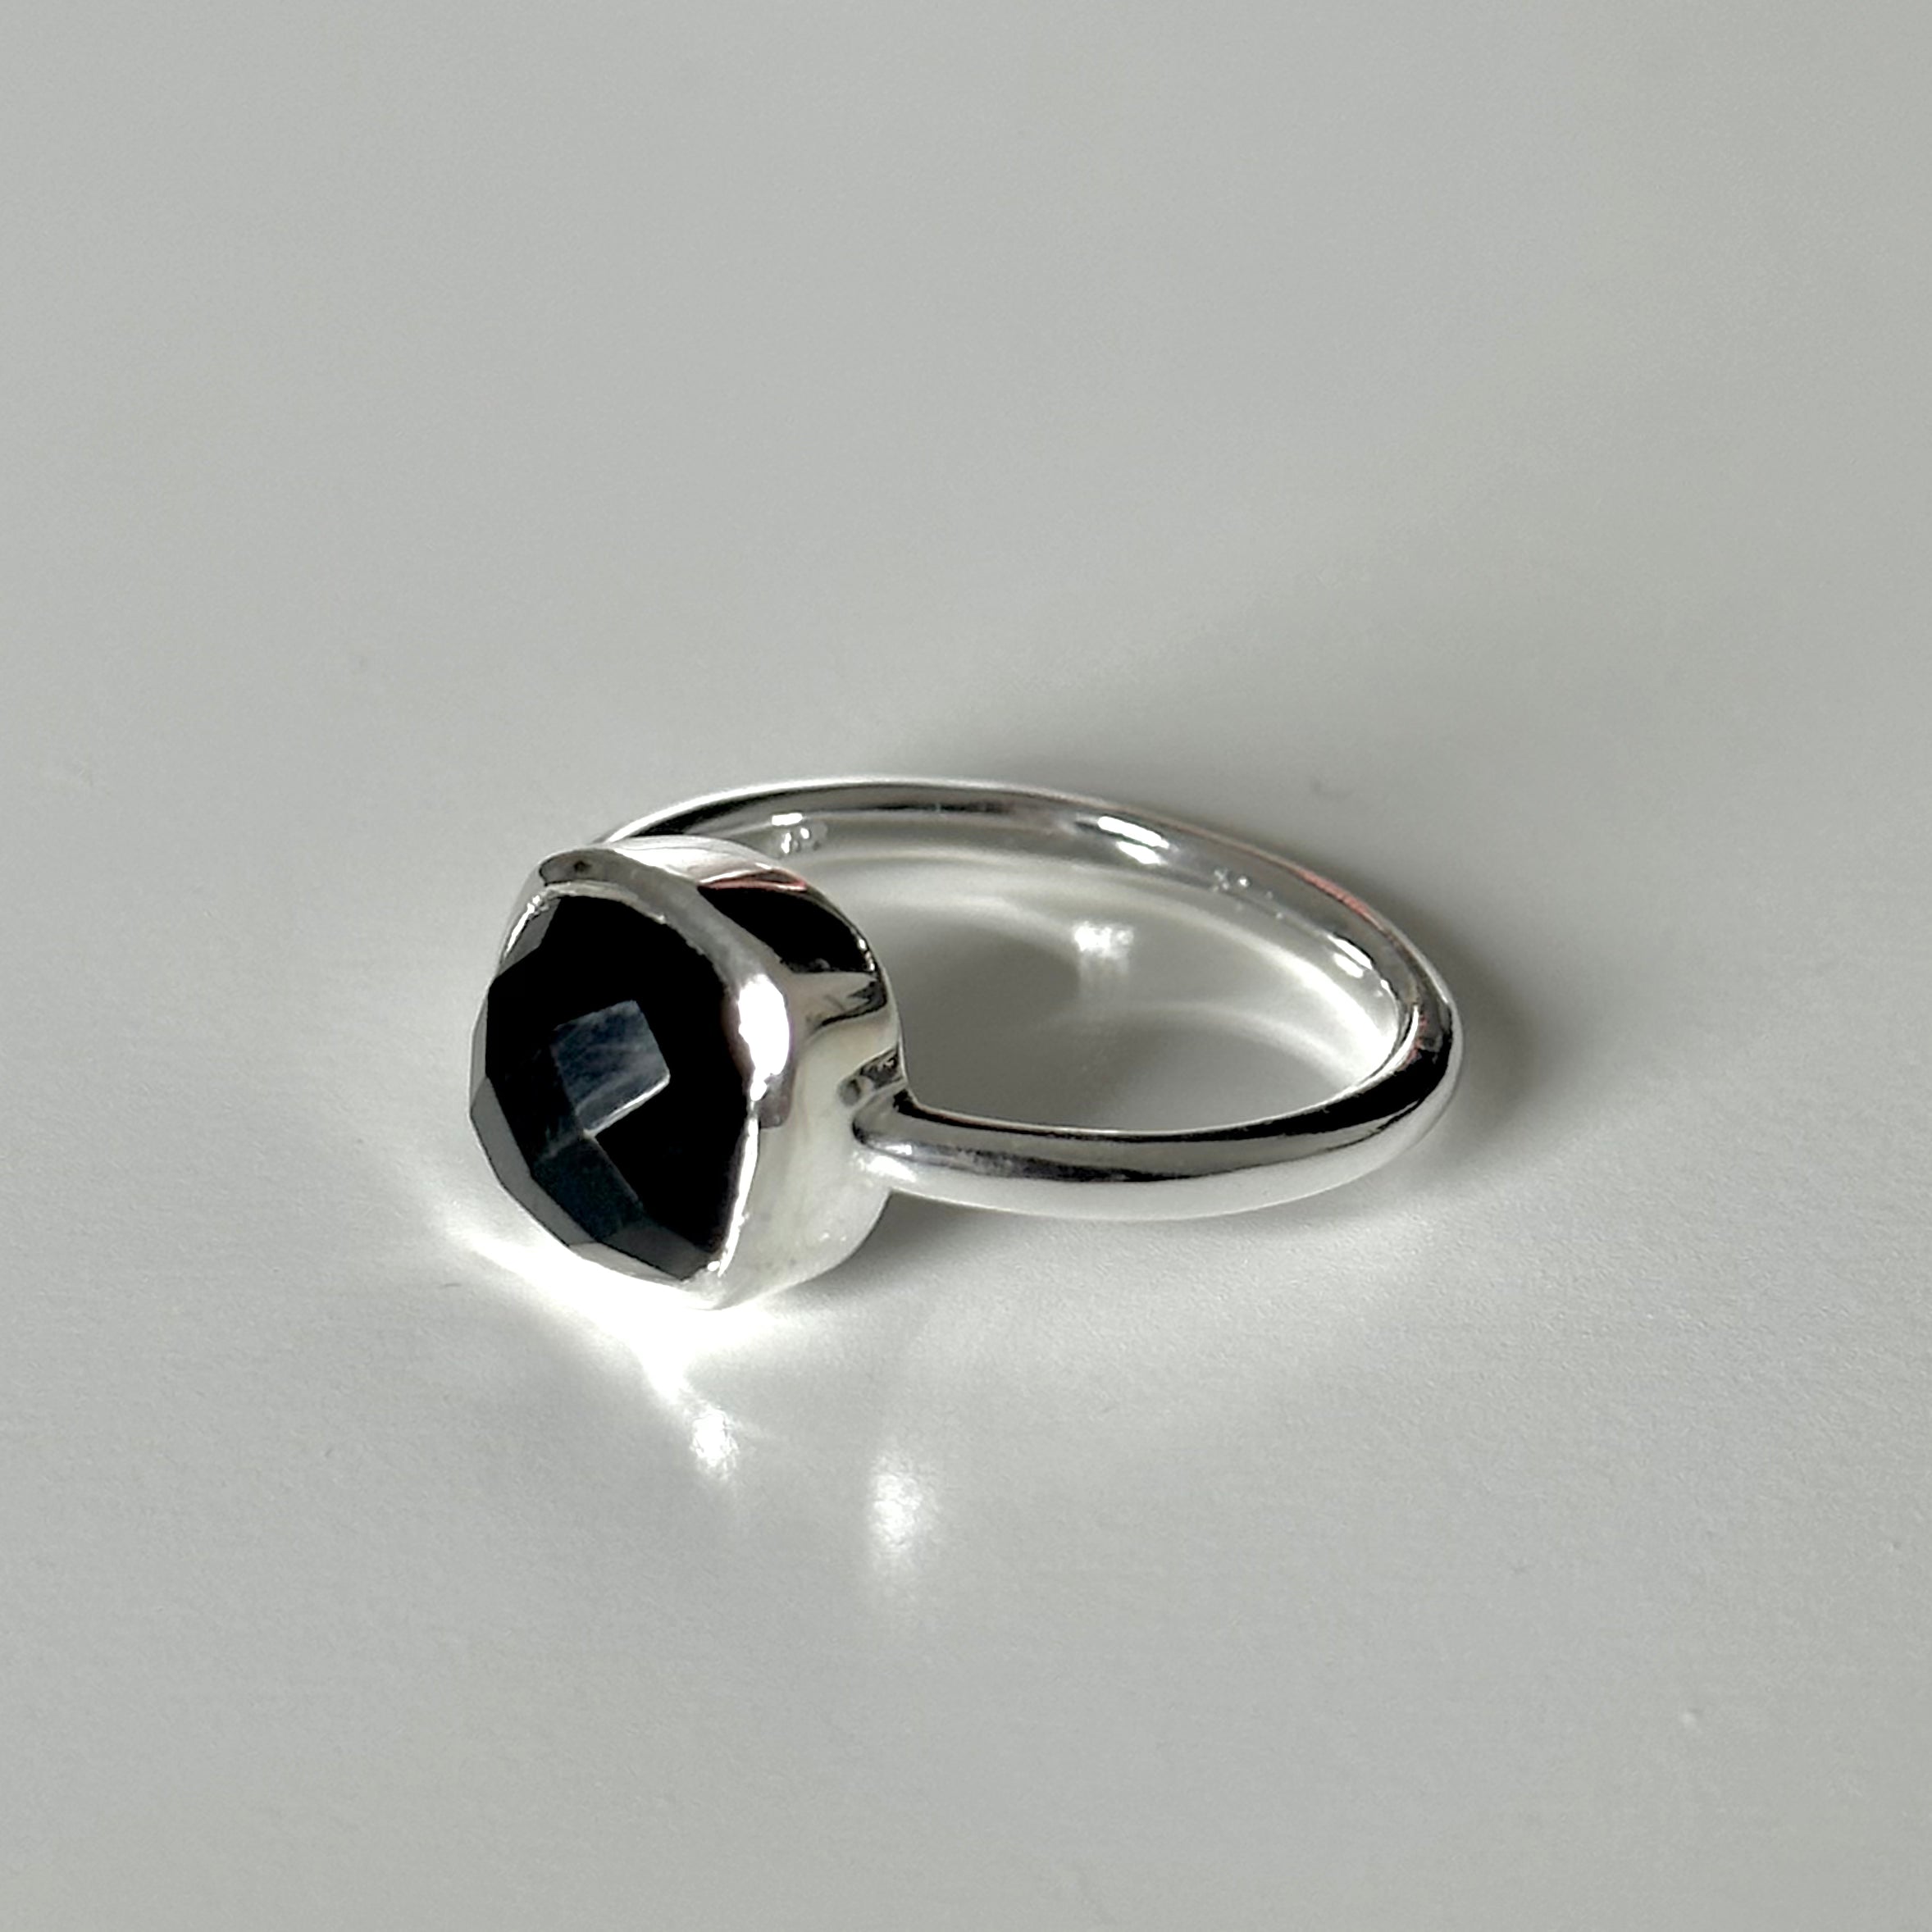 Faceted Square Cut Natural Gemstone Sterling Silver Solitaire Ring - Black Onyx